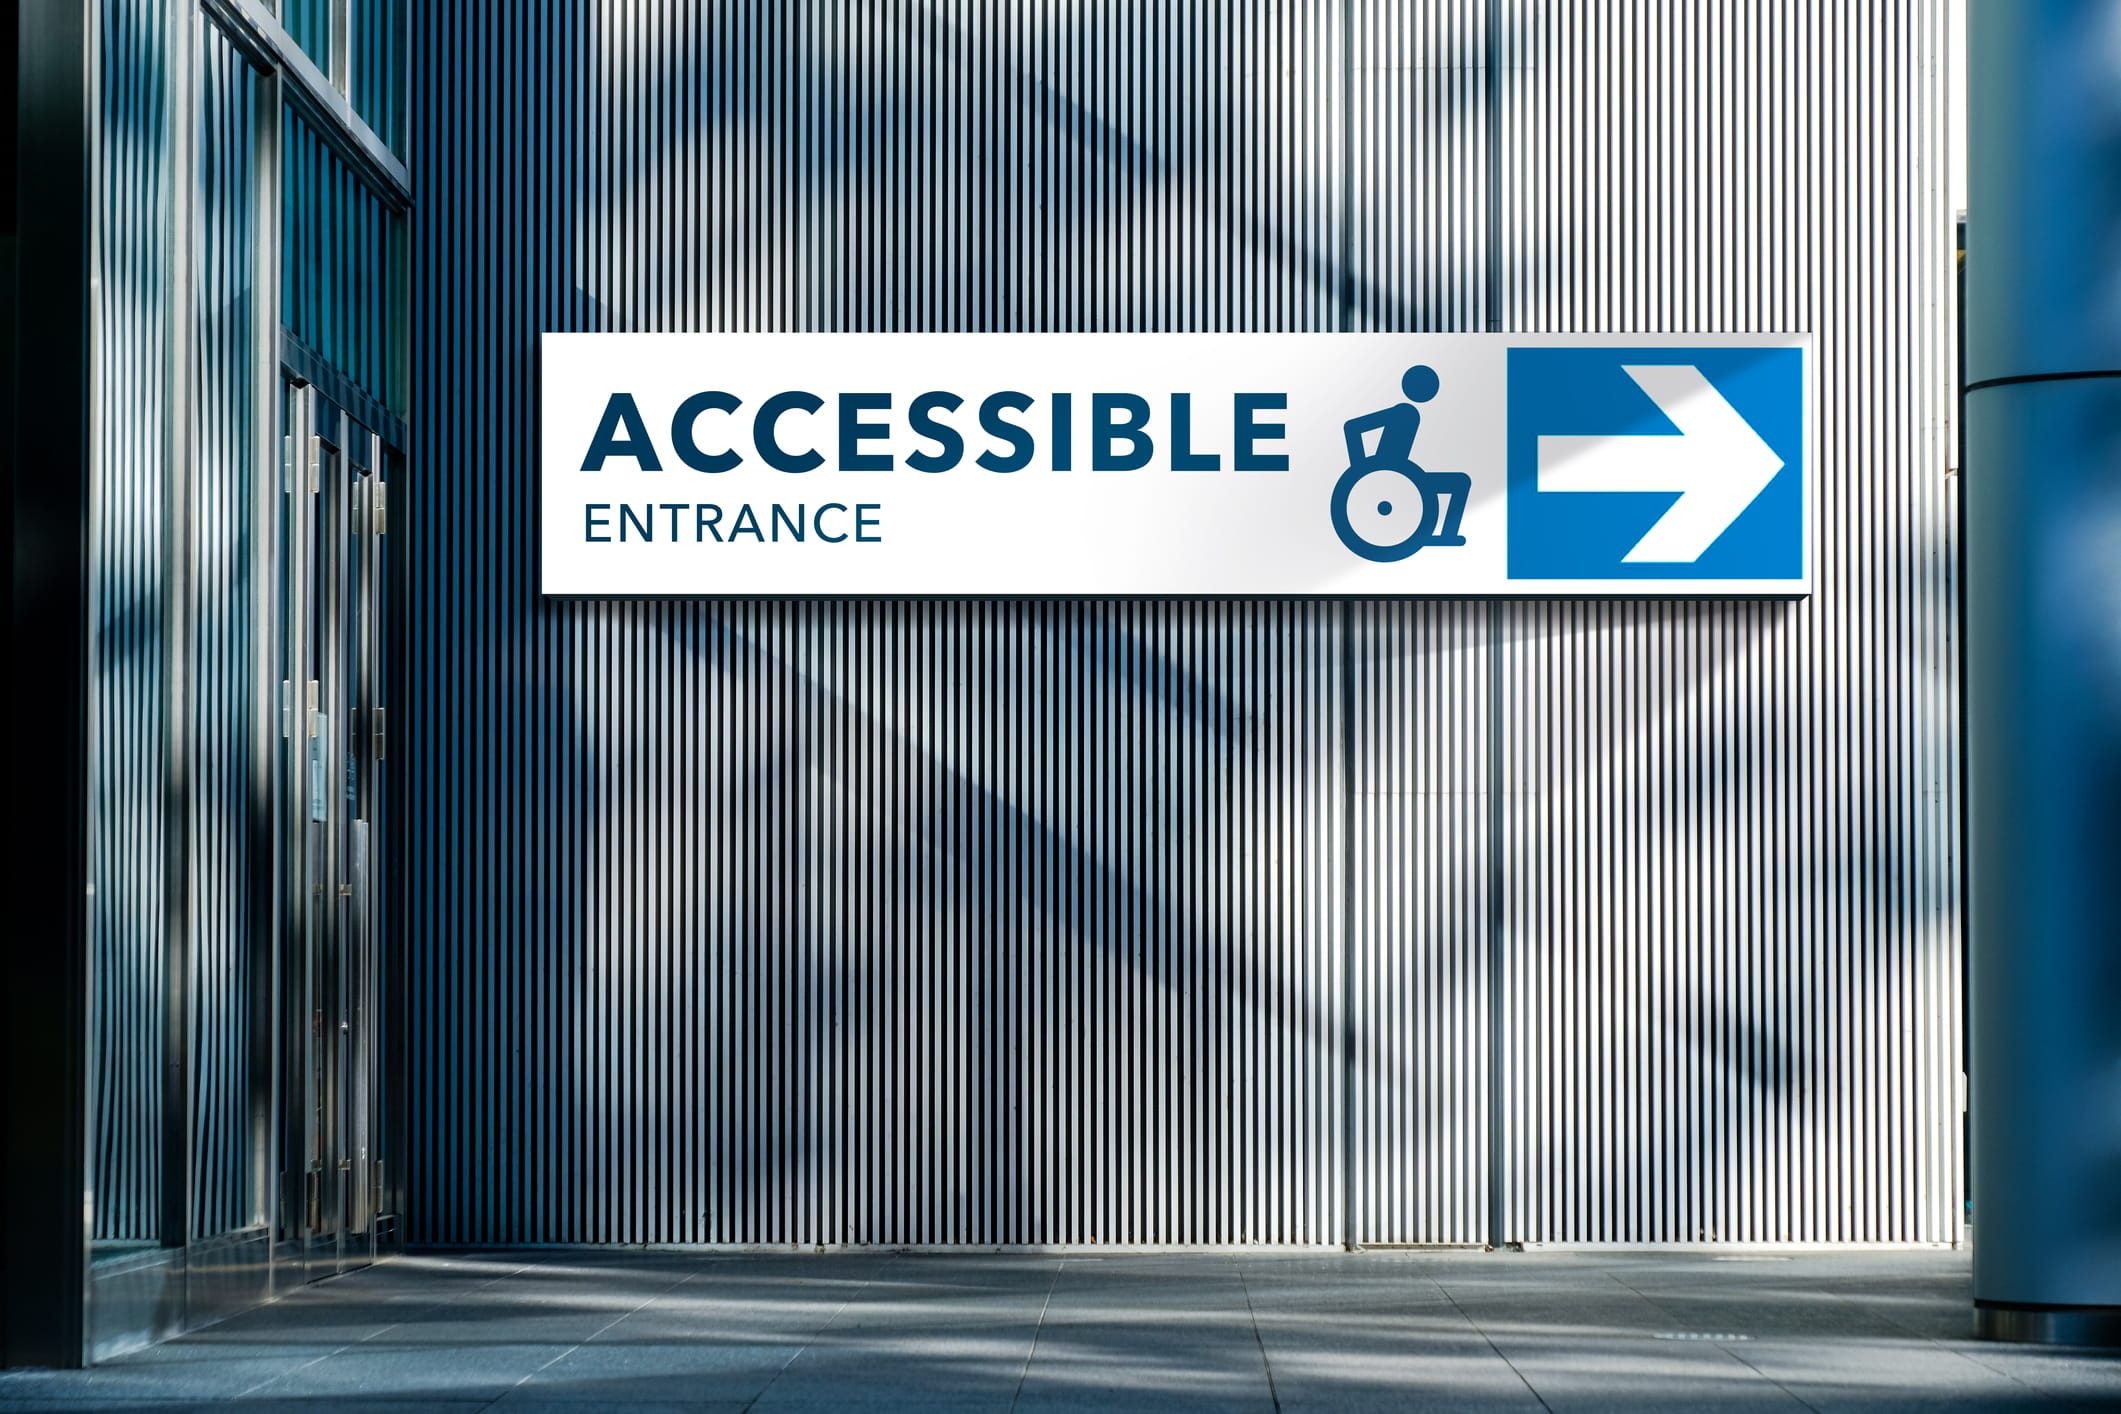 A wall-mounted sign with a blue and white design points to the accessible entrance. The sign features an arrow pointing right and a wheelchair icon above the text "ACCESSIBLE ENTRANCE." The background consists of vertical corrugated metal panels.